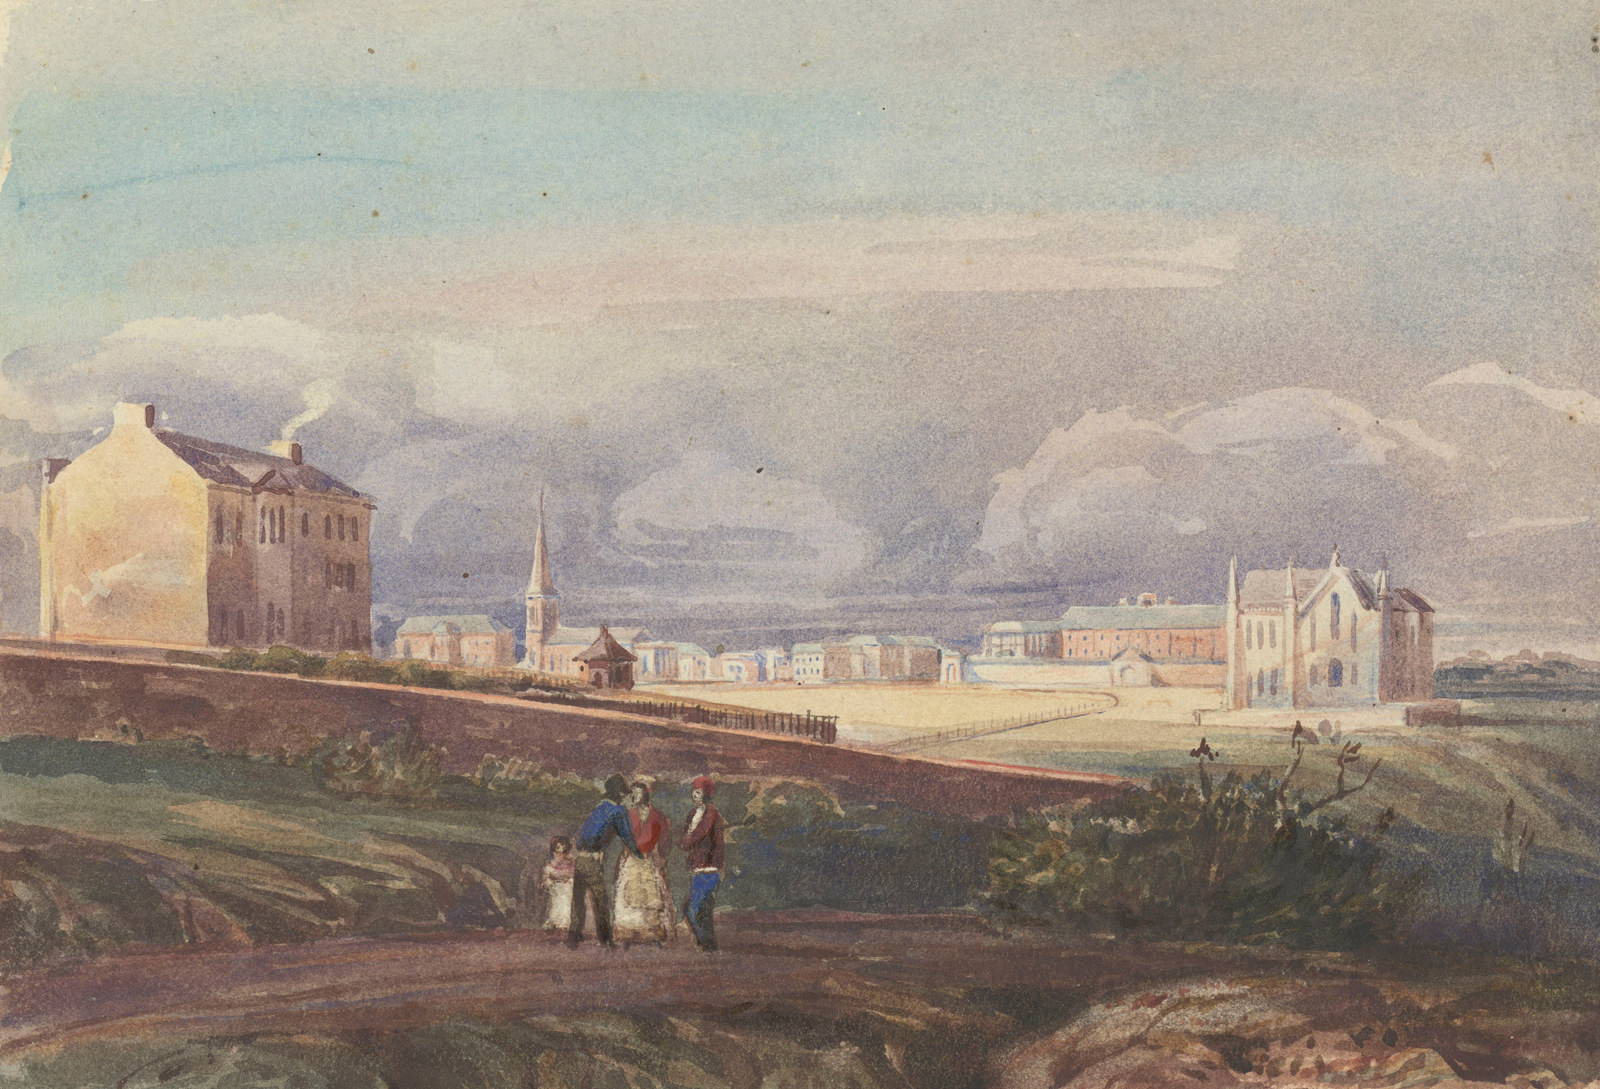 Watercolour drawing of group of people walking on path through grassy paddock in colonial Sydney with buildings in the background and rocks and shrubs in foreground.